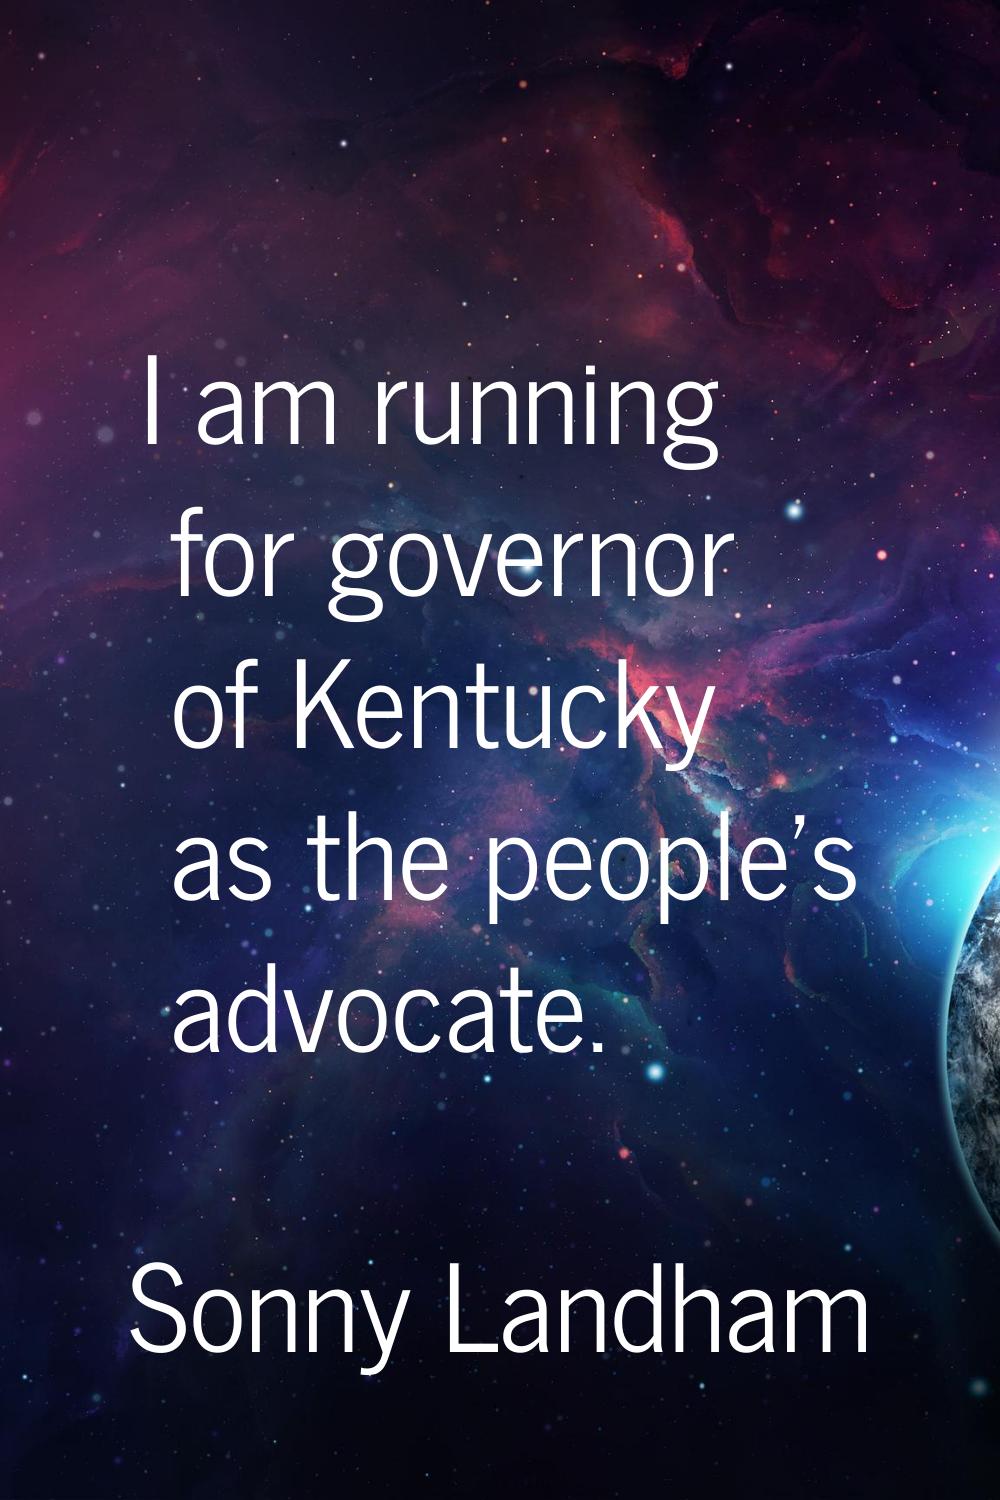 I am running for governor of Kentucky as the people's advocate.